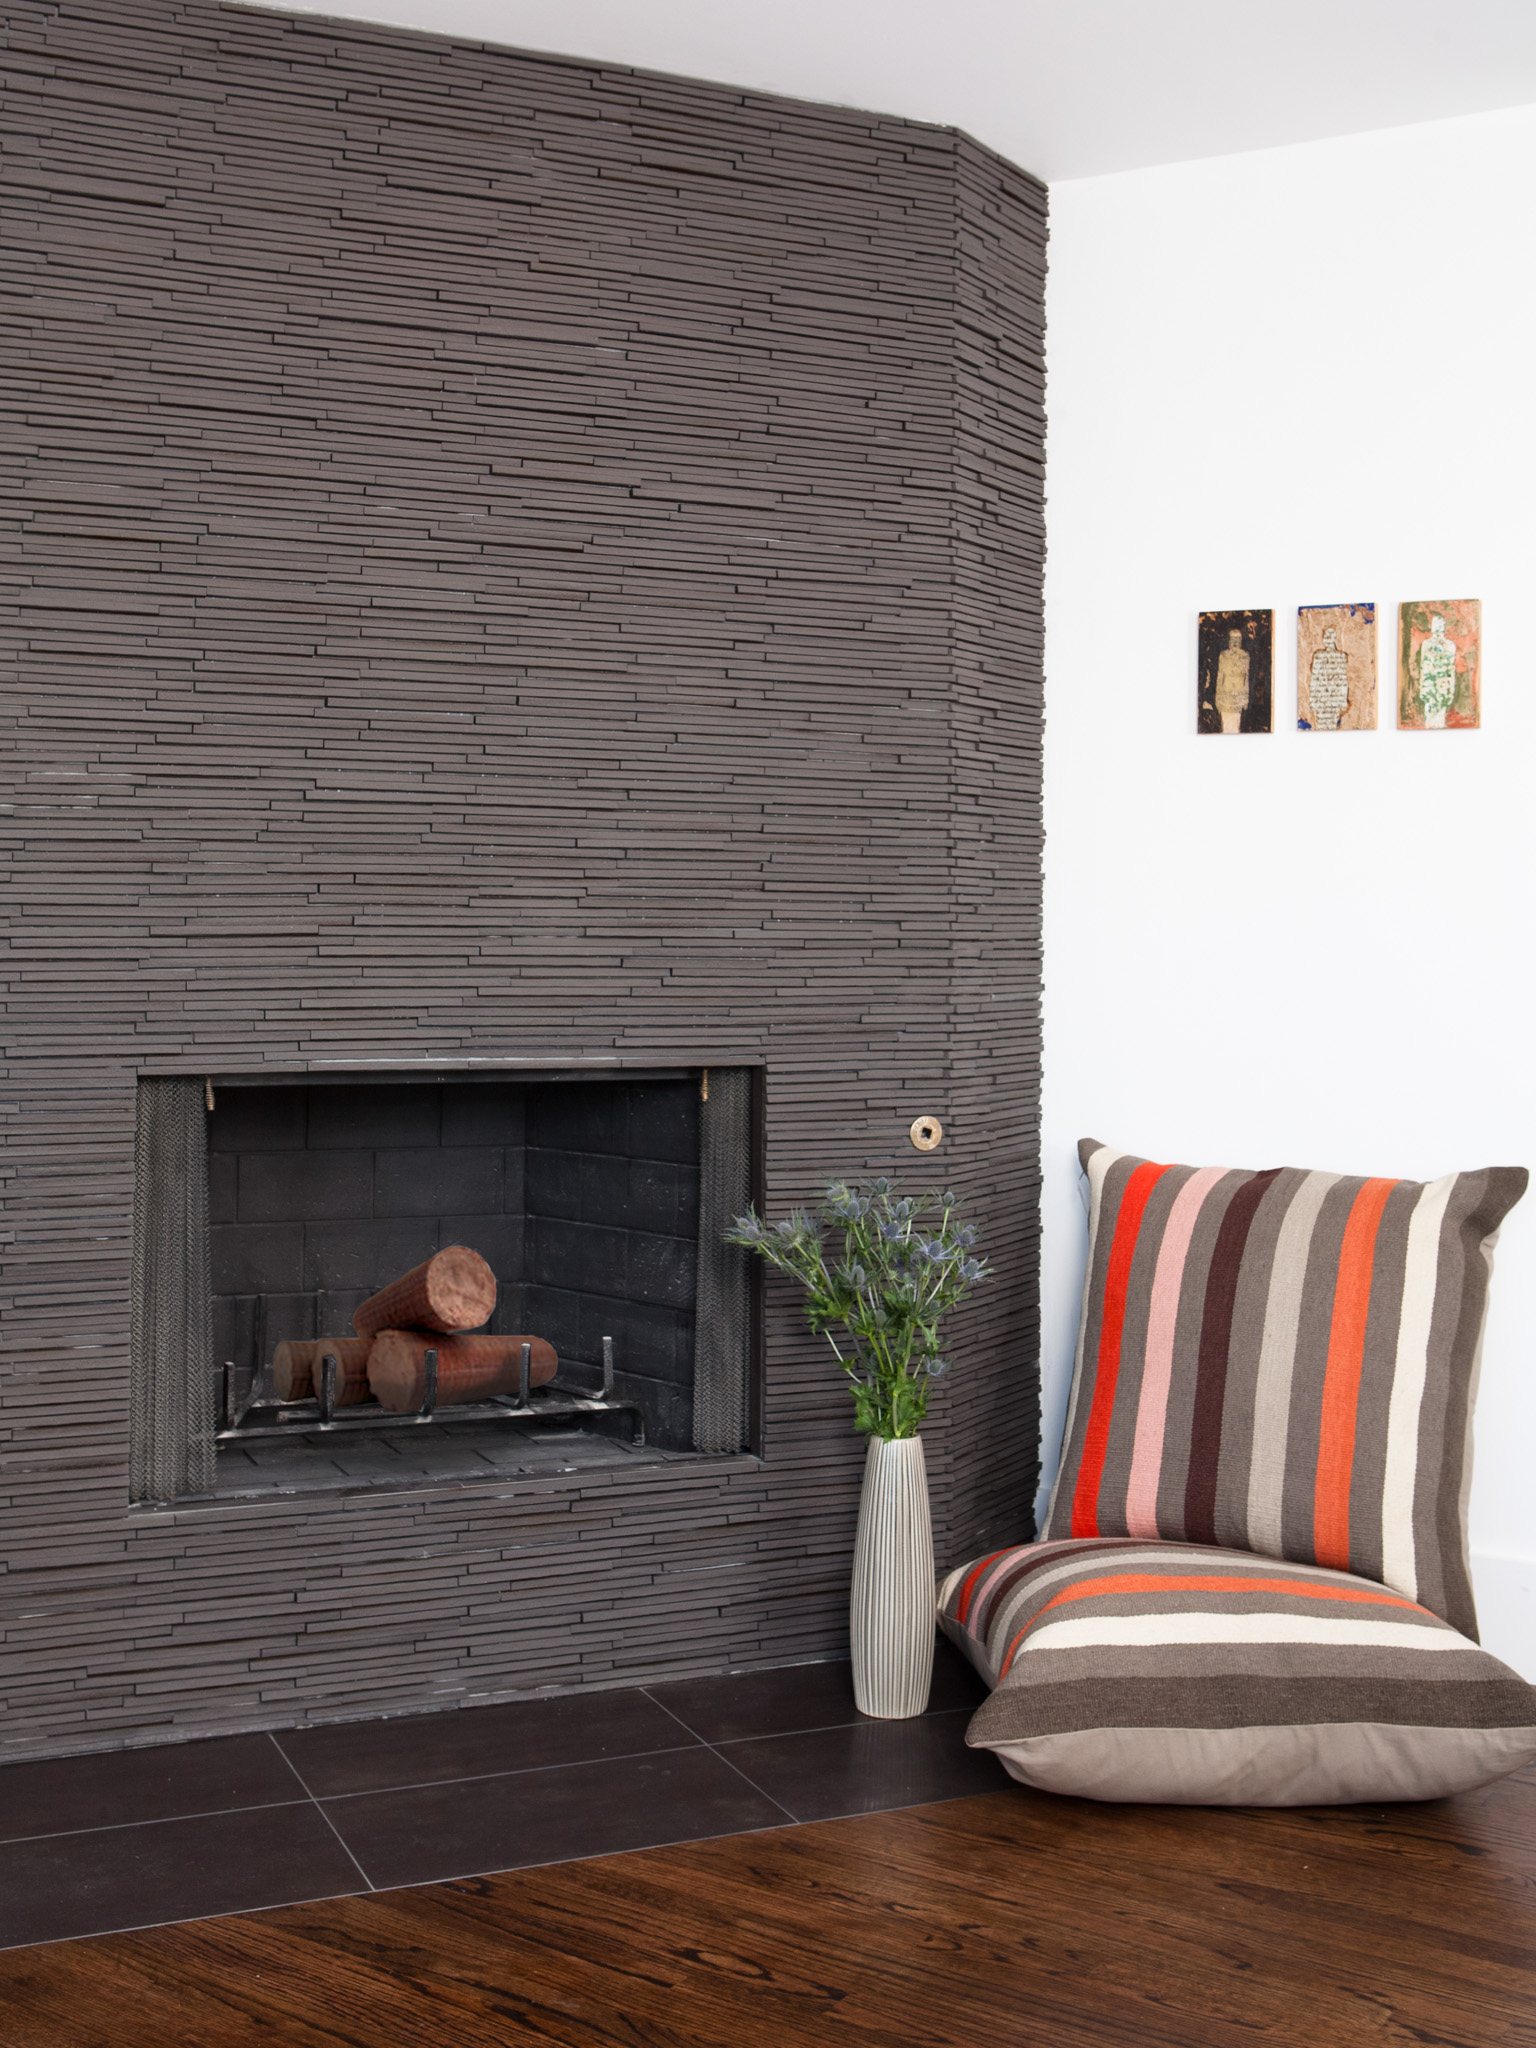 tiled fireplace wall